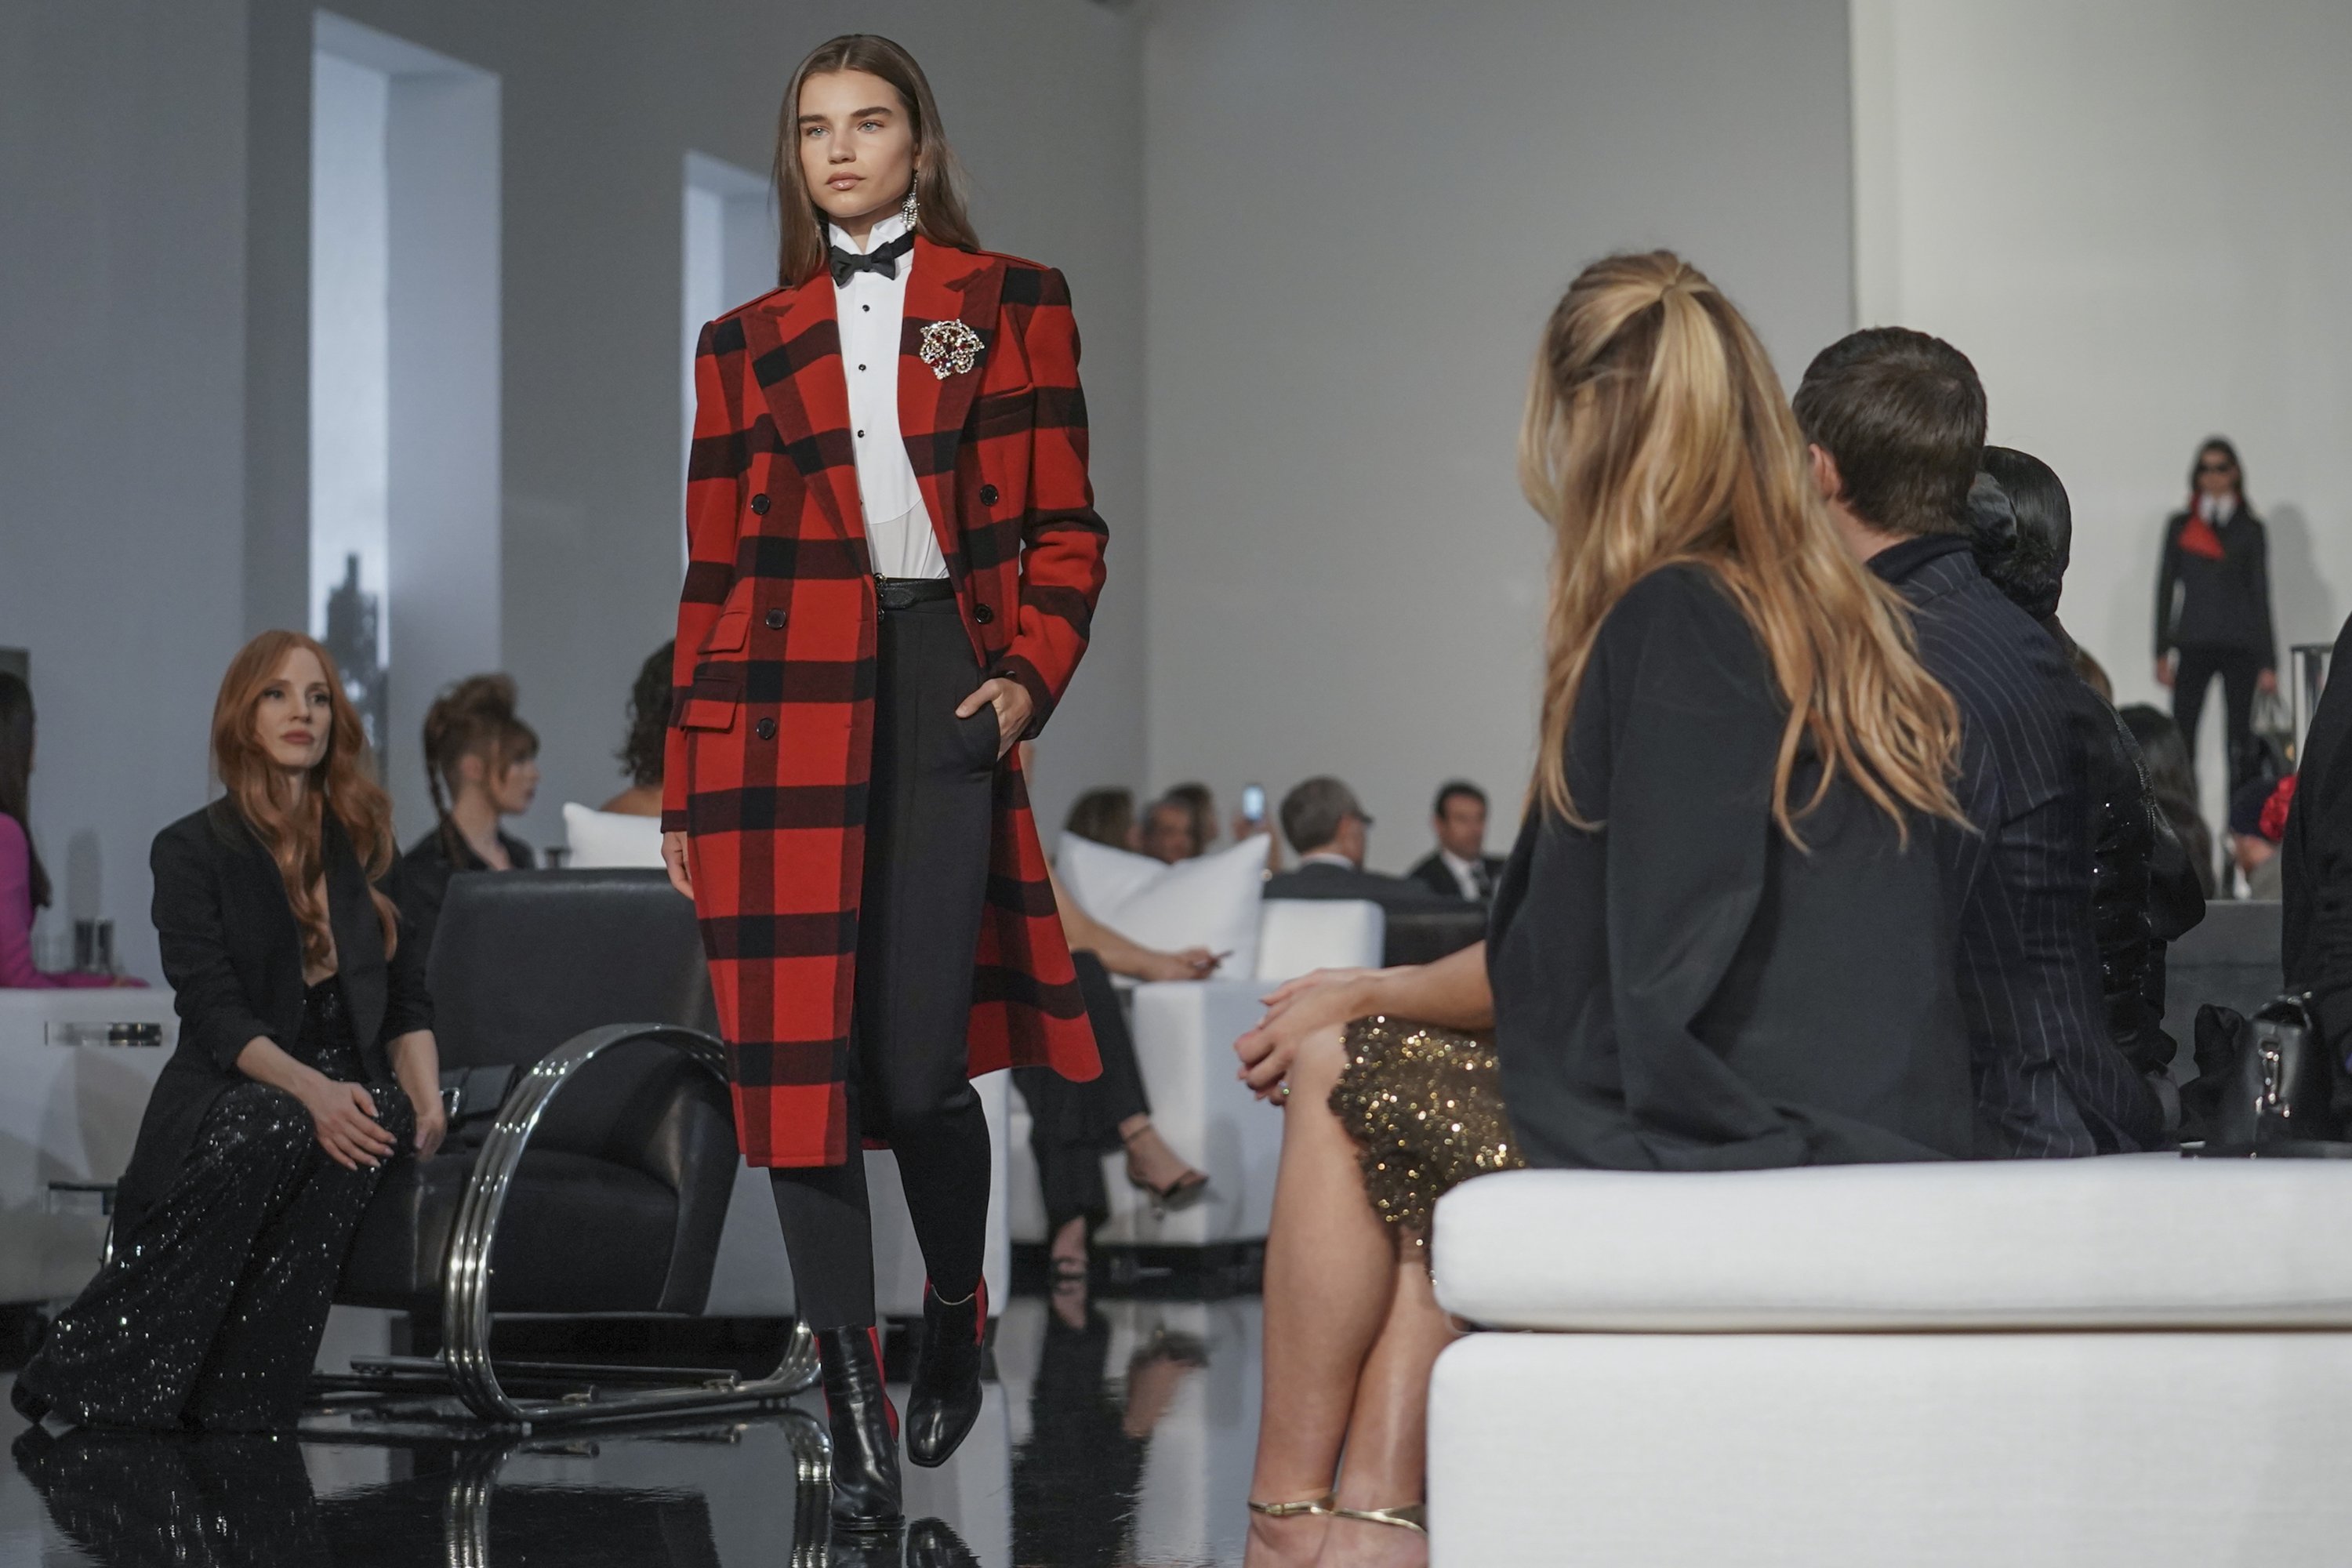 Ralph Lauren's 2022 fashion show brings home coziness to stage | Daily Sabah